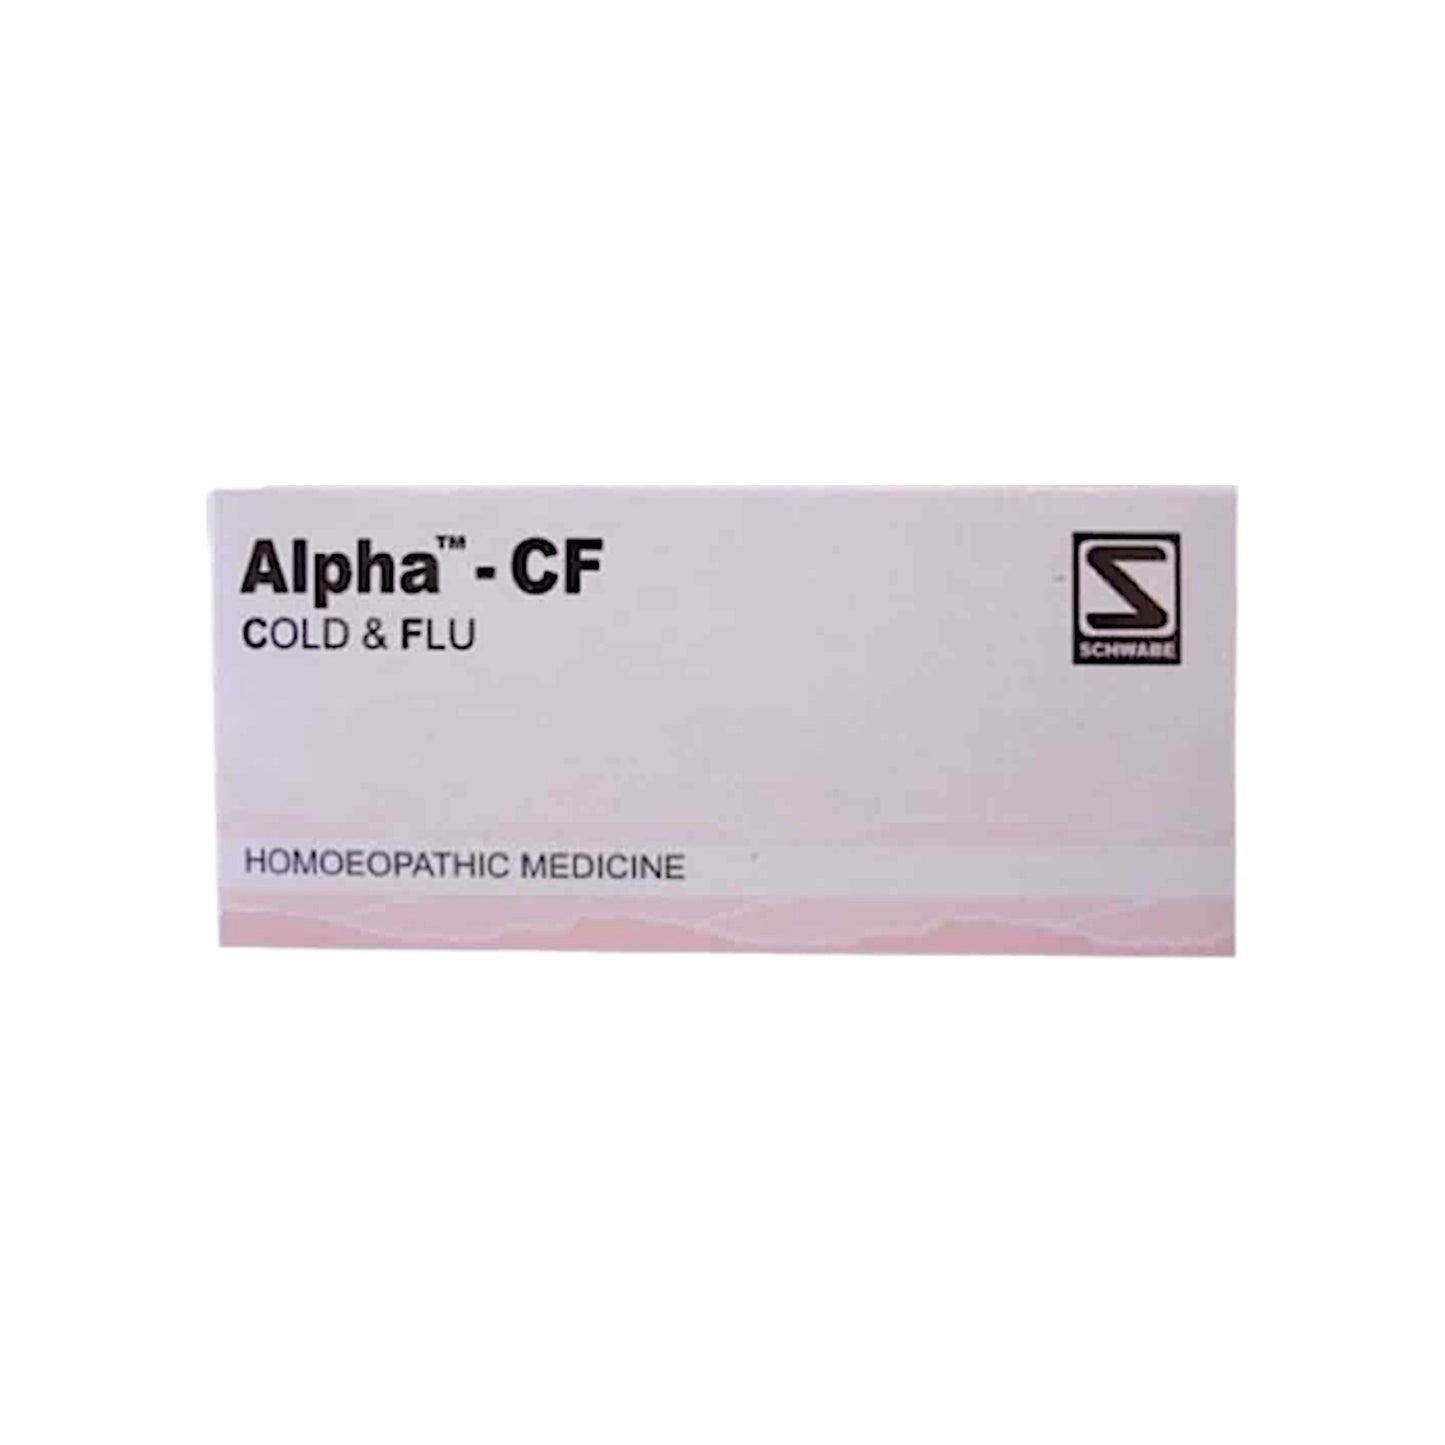 Image: Dr. Willmar Schwabe Homeopathy - Alpha-CF 40 Tablets - Homeopathic remedy for cold and flu relief.